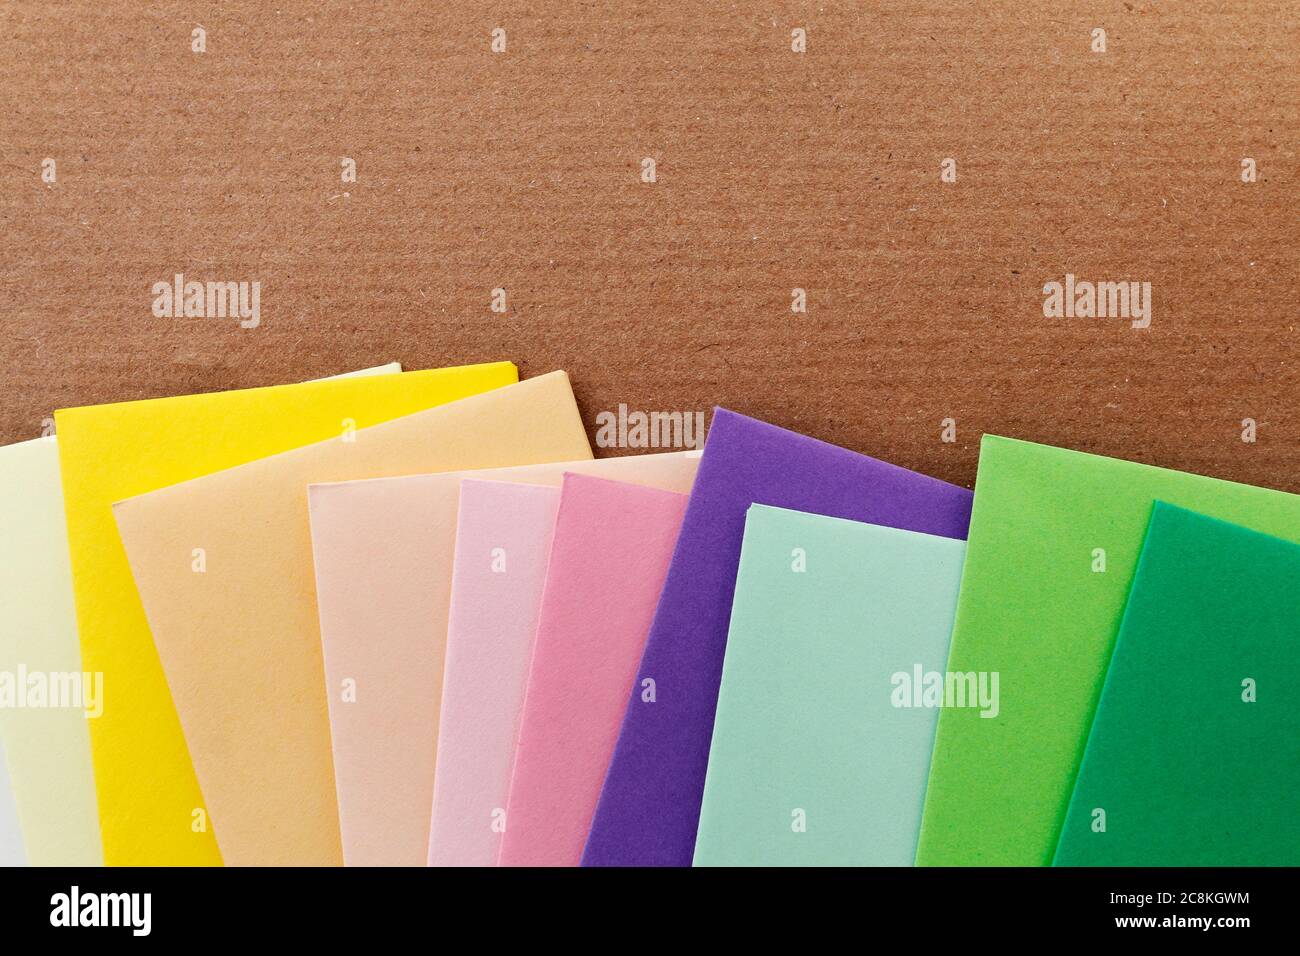 Colorful envelopes on brown paper background, copy space. Stock Photo